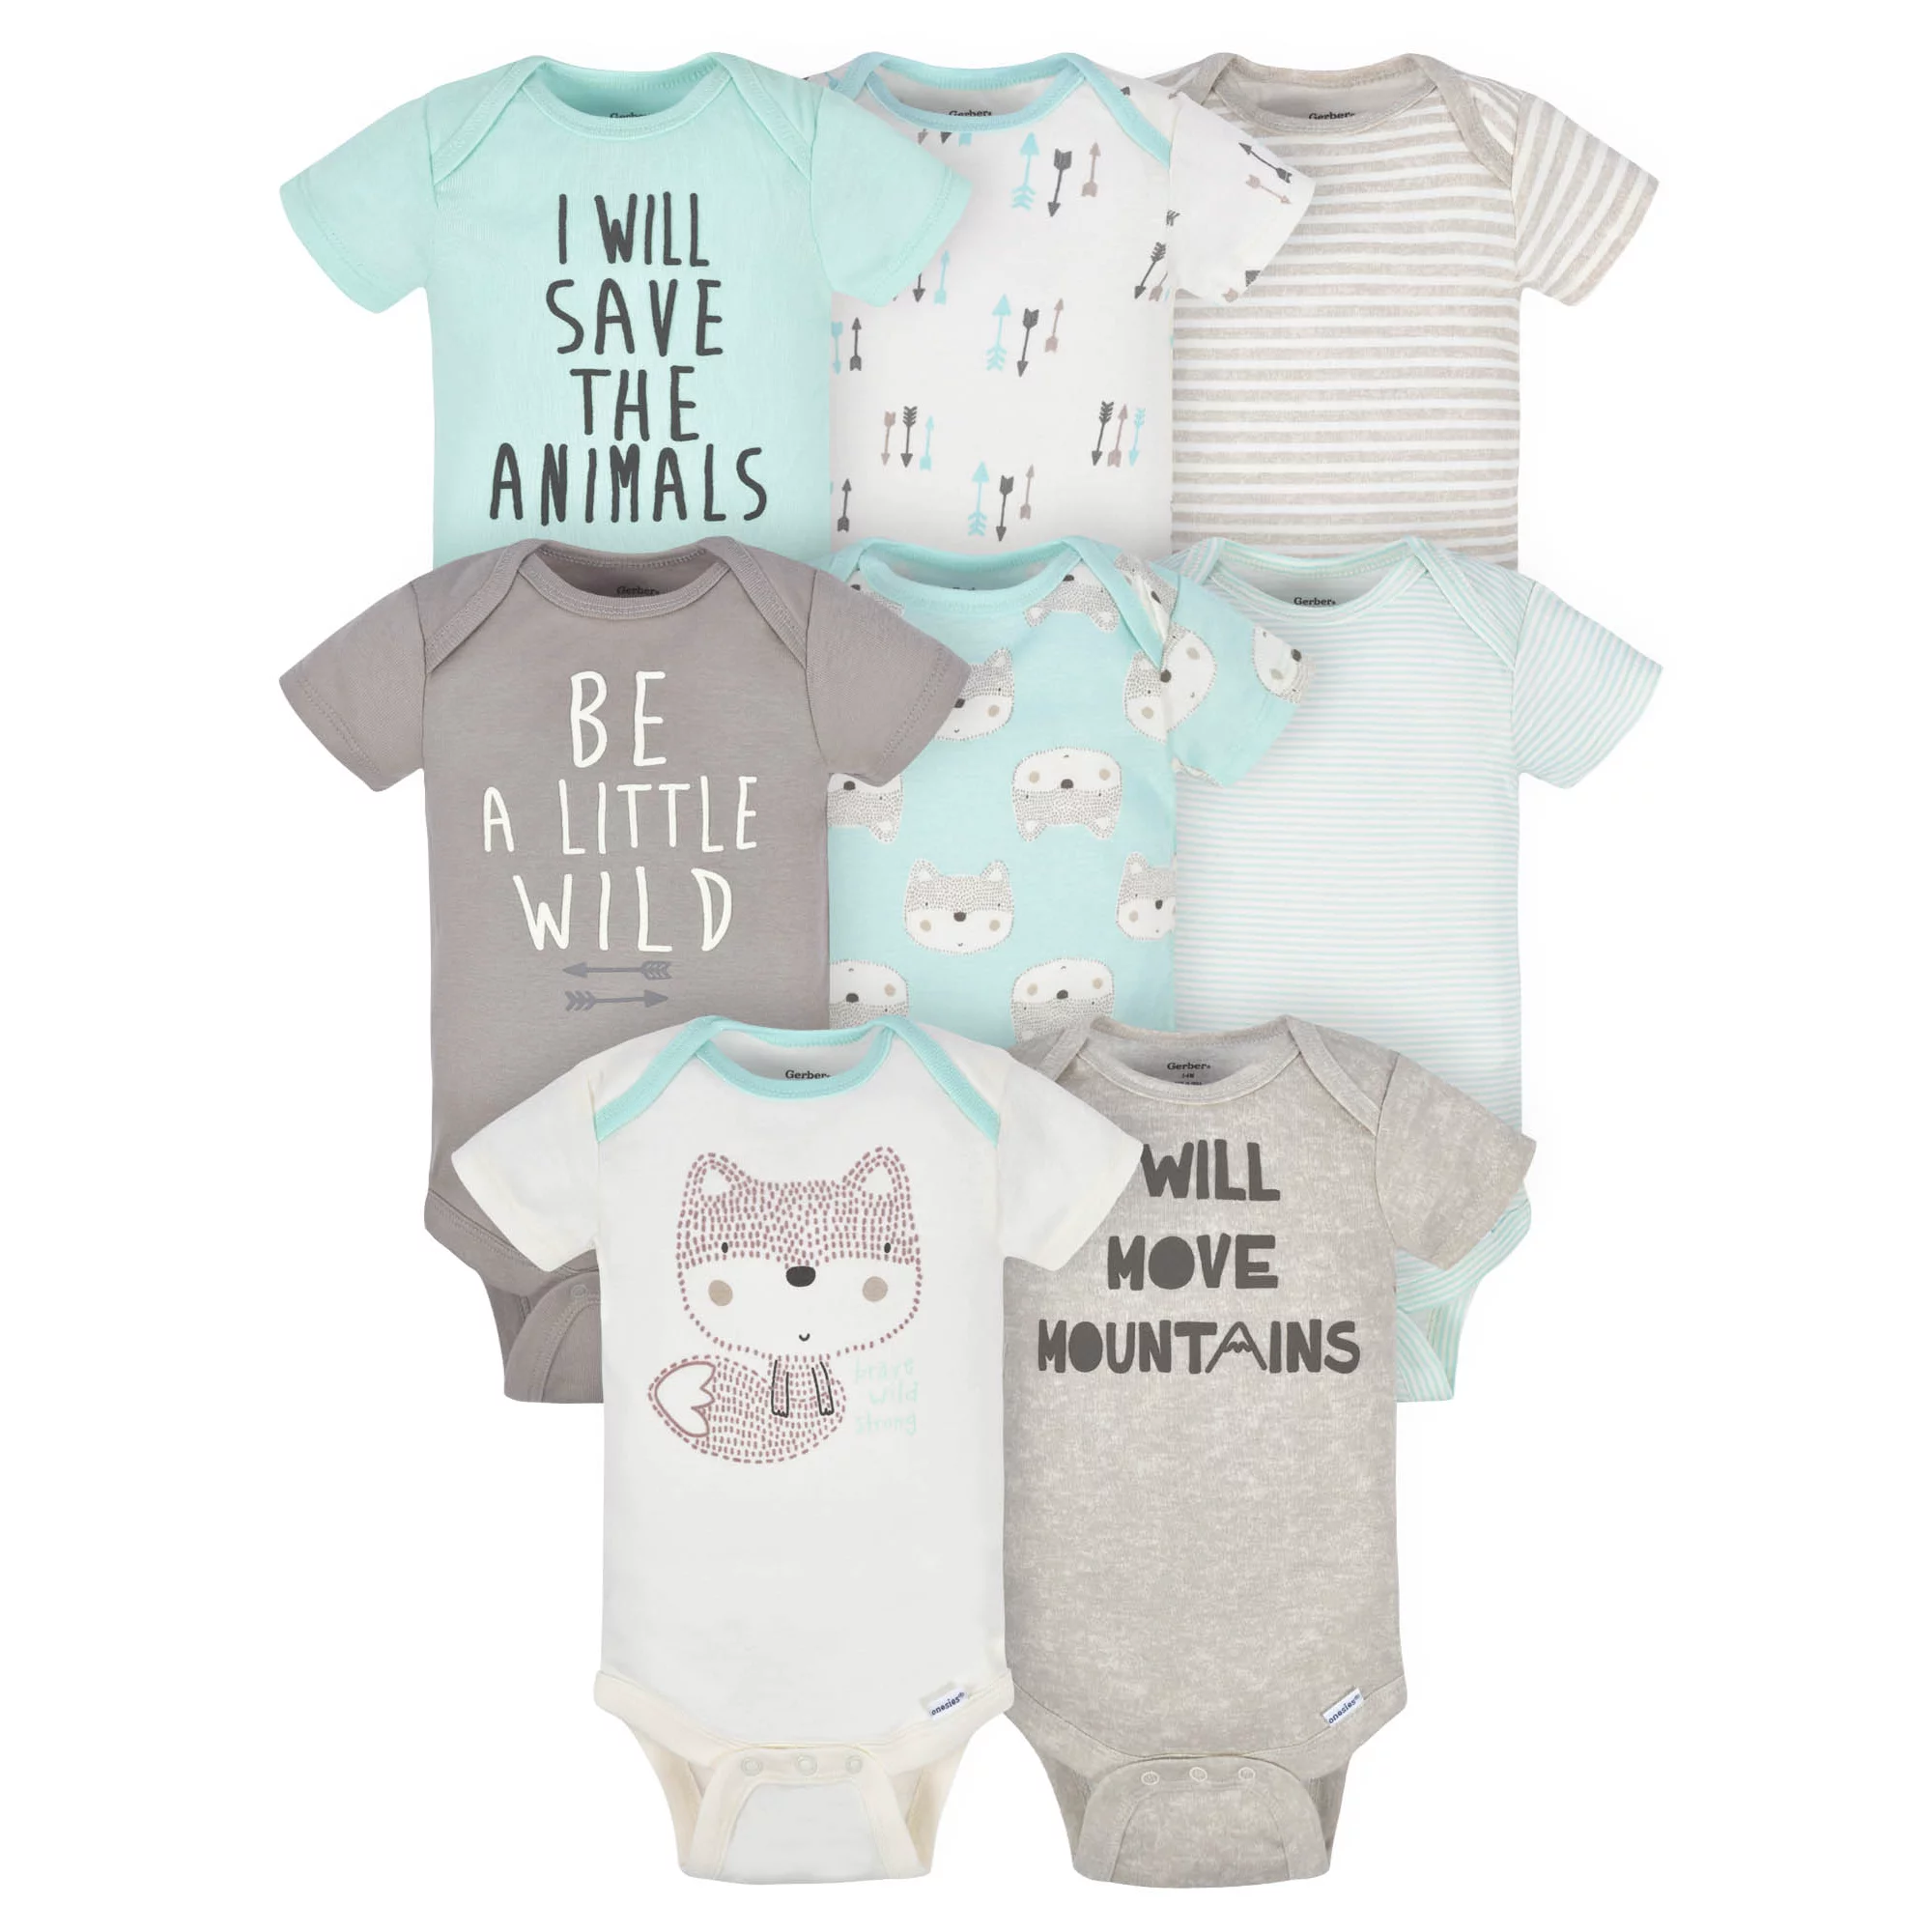 Baby Shirts For Boys, Baby Shirts For Girls